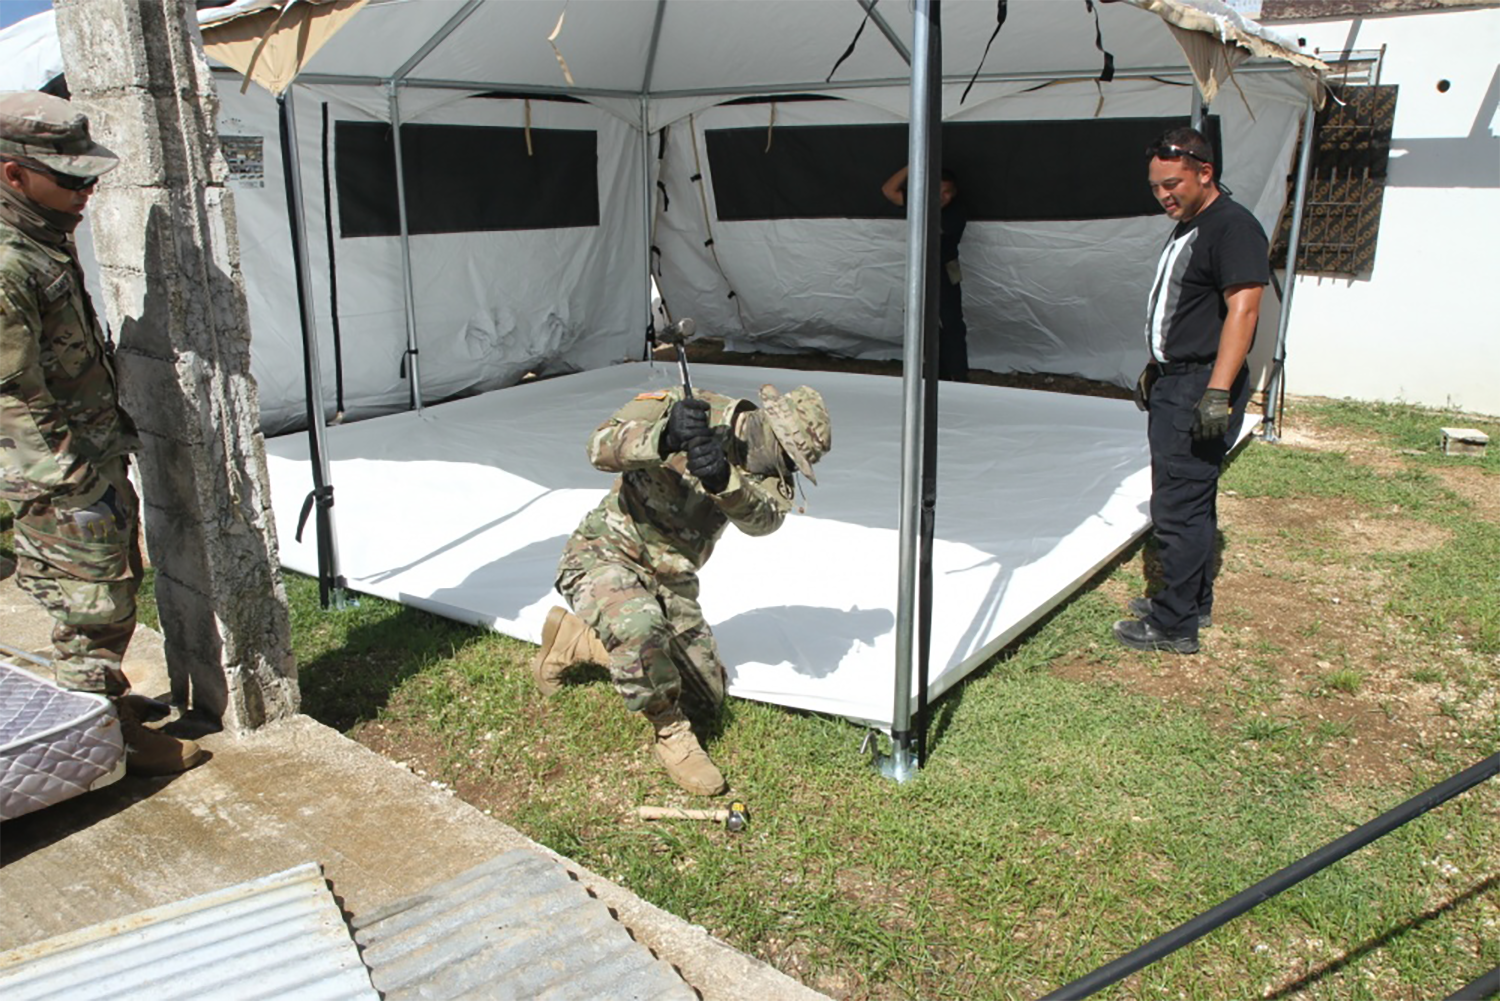 Athens Utility Shelter — Celina Tent – Party Tents, Military Products, &  Contract Manufacturing